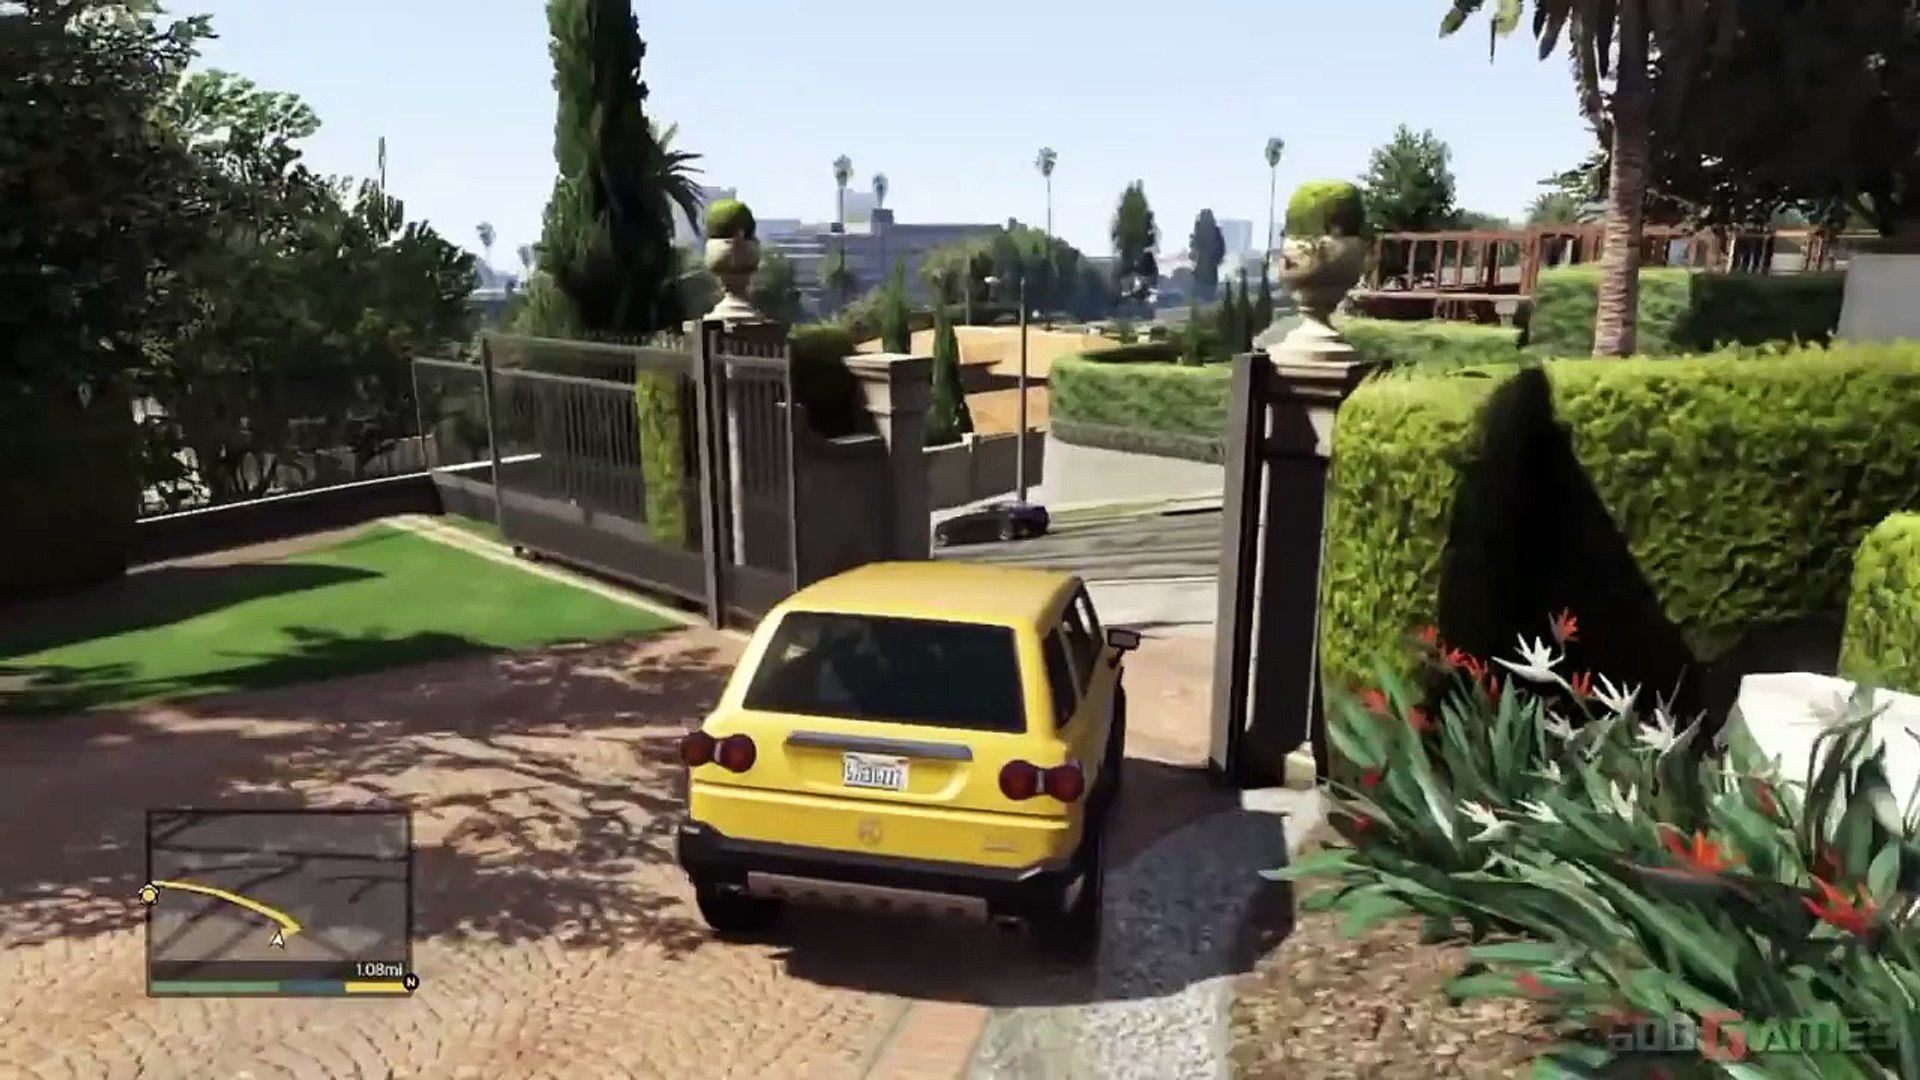 GTA V PS3 Gameplay Walkthrough Playthrough 1080P Part 3 Complications  YouTube - video Dailymotion